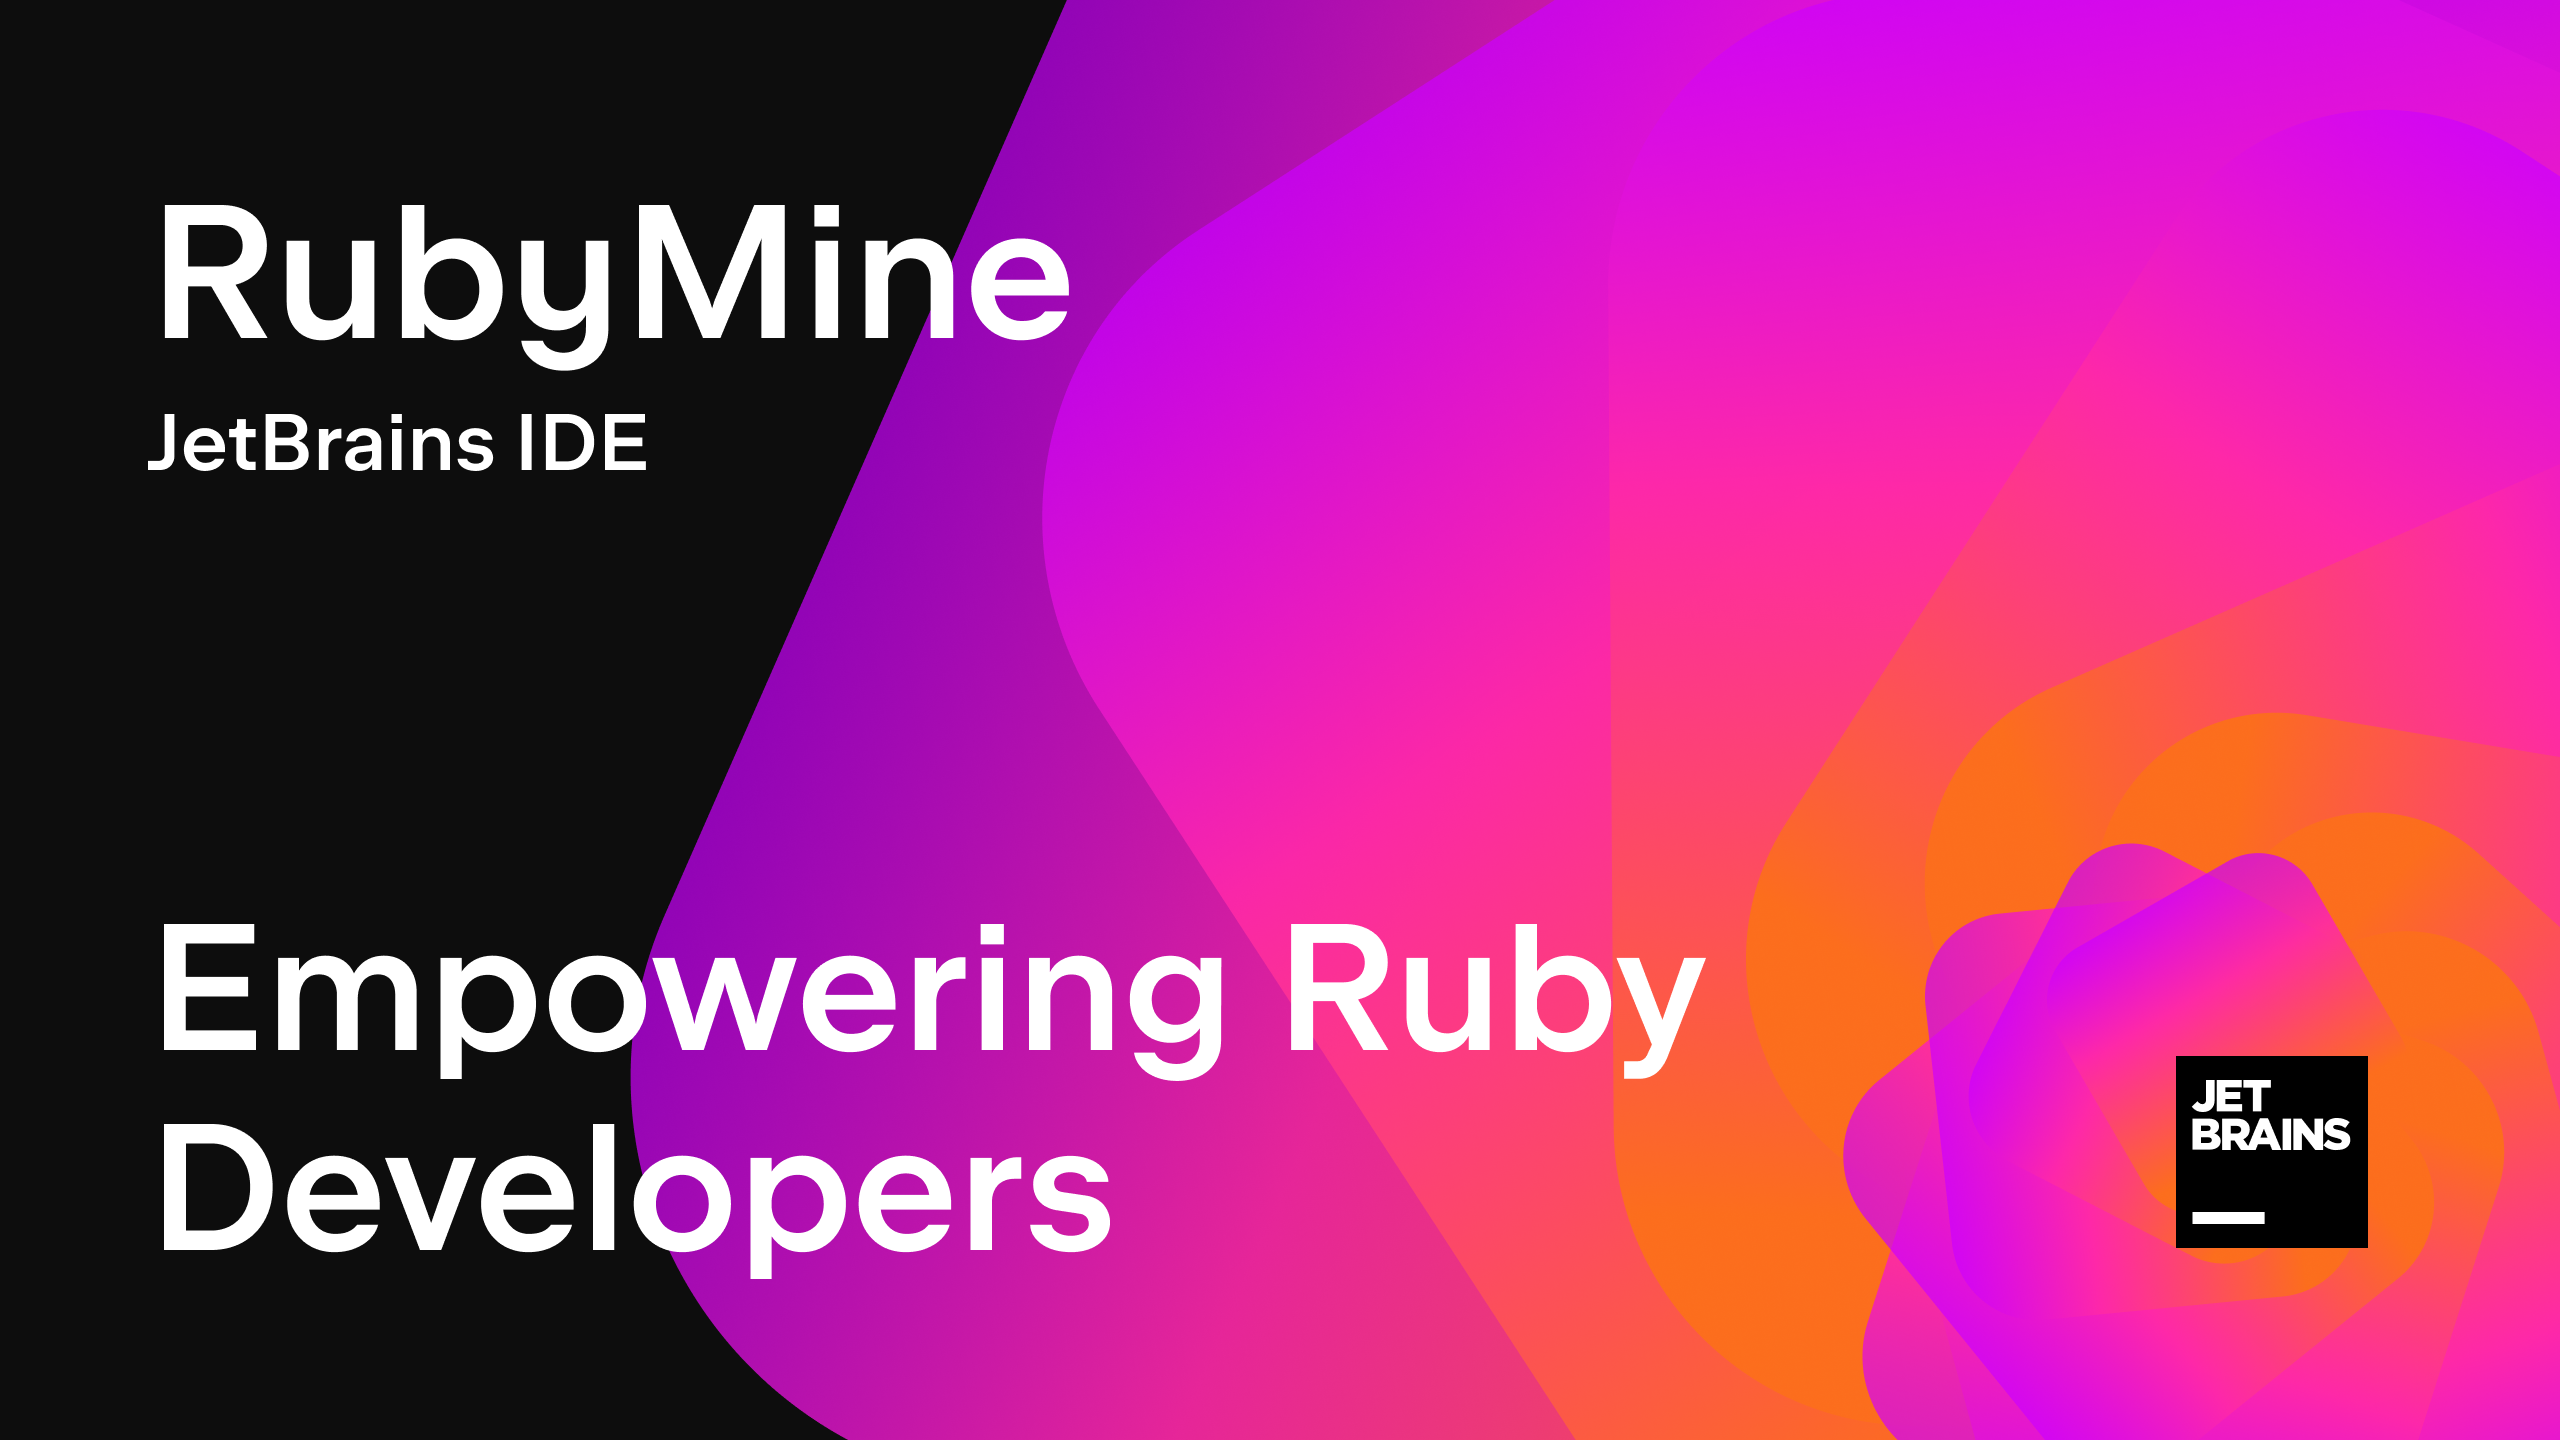 The Ruby on Rails IDE by JetBrains